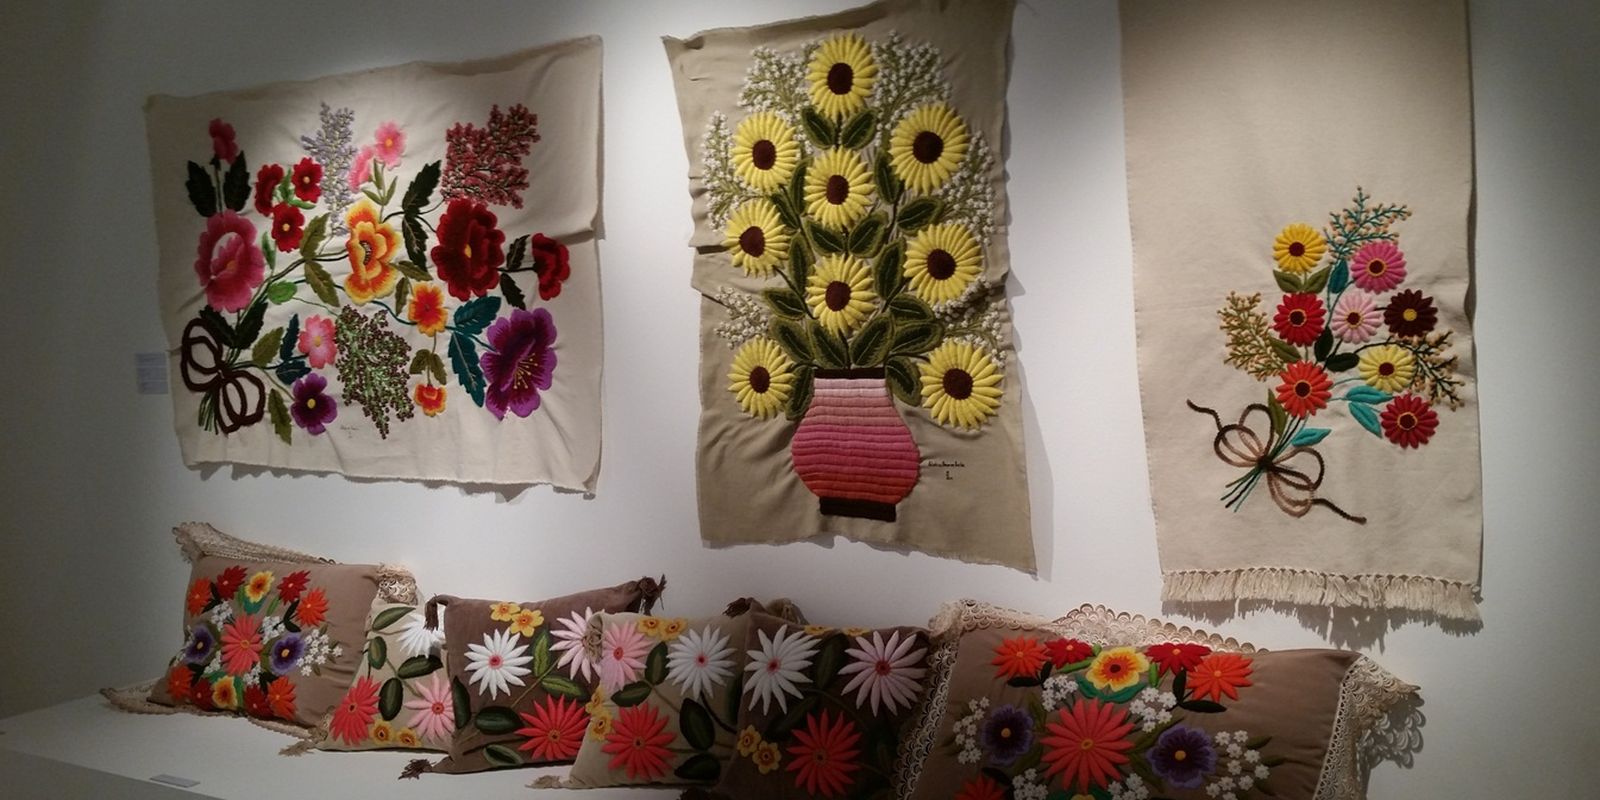 Project uses embroidery for the inclusion of women in Pará
– News X